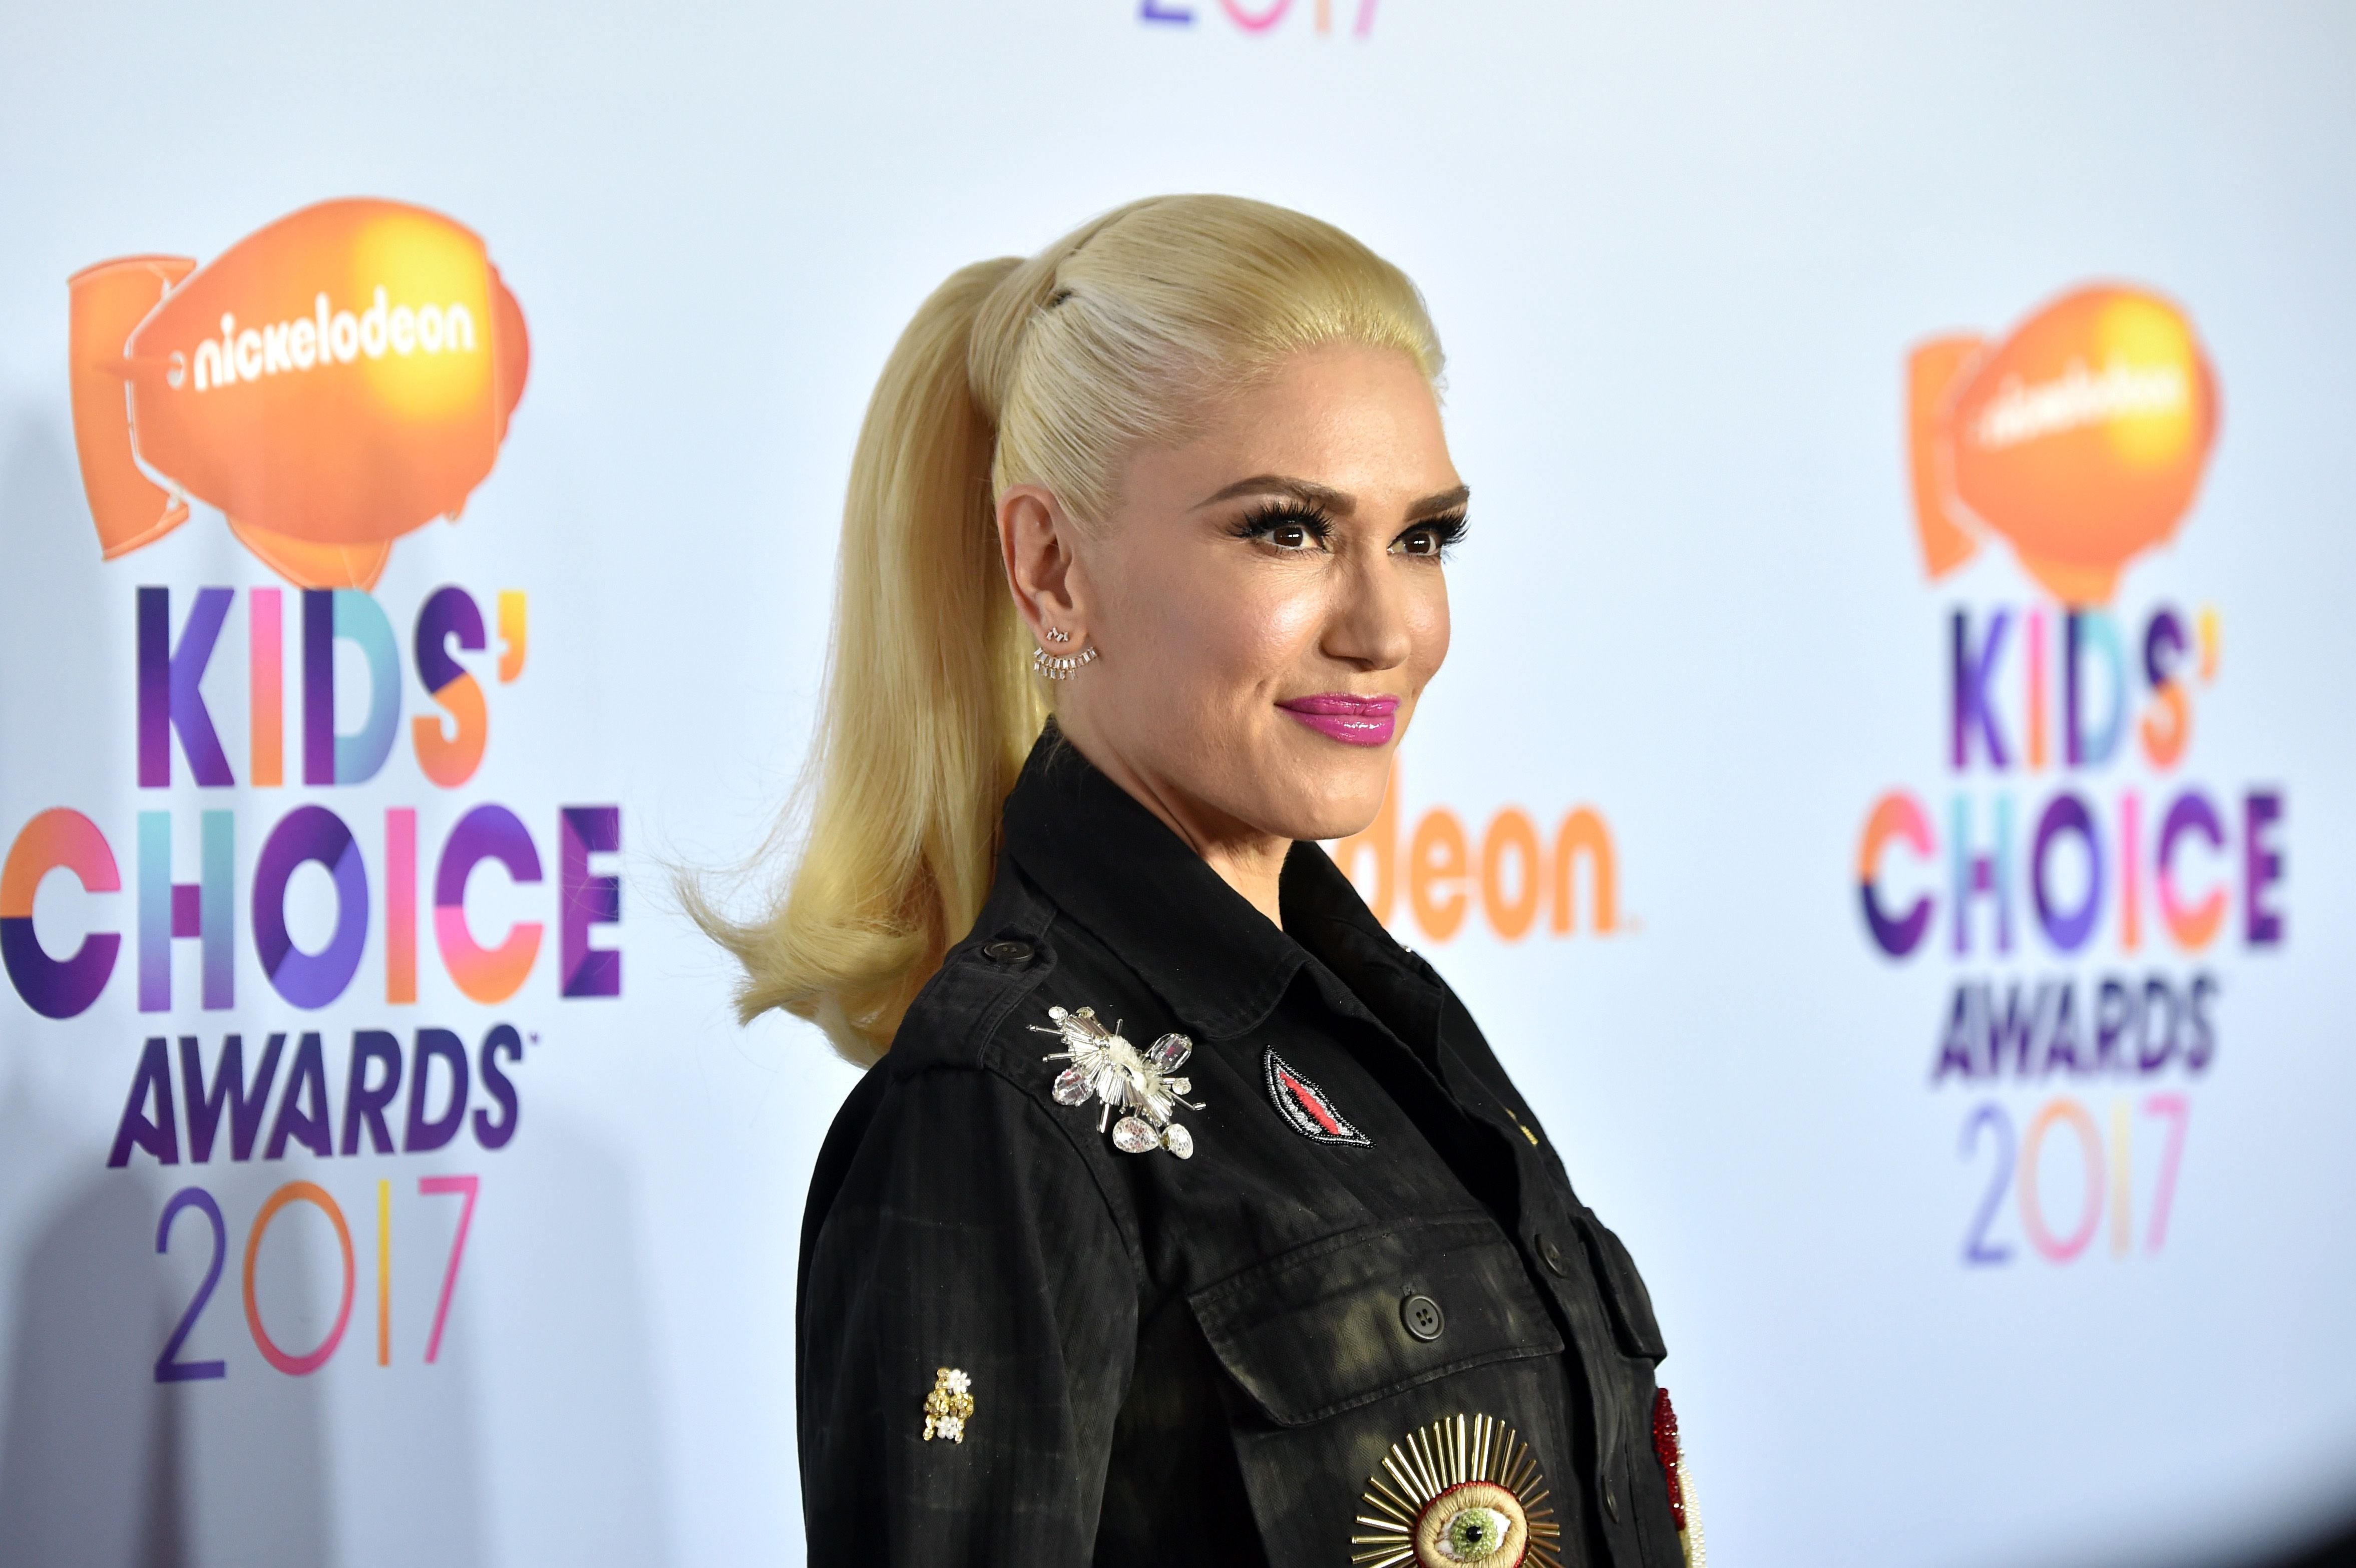 Singer Gwen Stefani at Nickelodeon's 2017 Kids' Choice Awards at USC Galen Center on March 11, 2017 | Photo: Getty Images